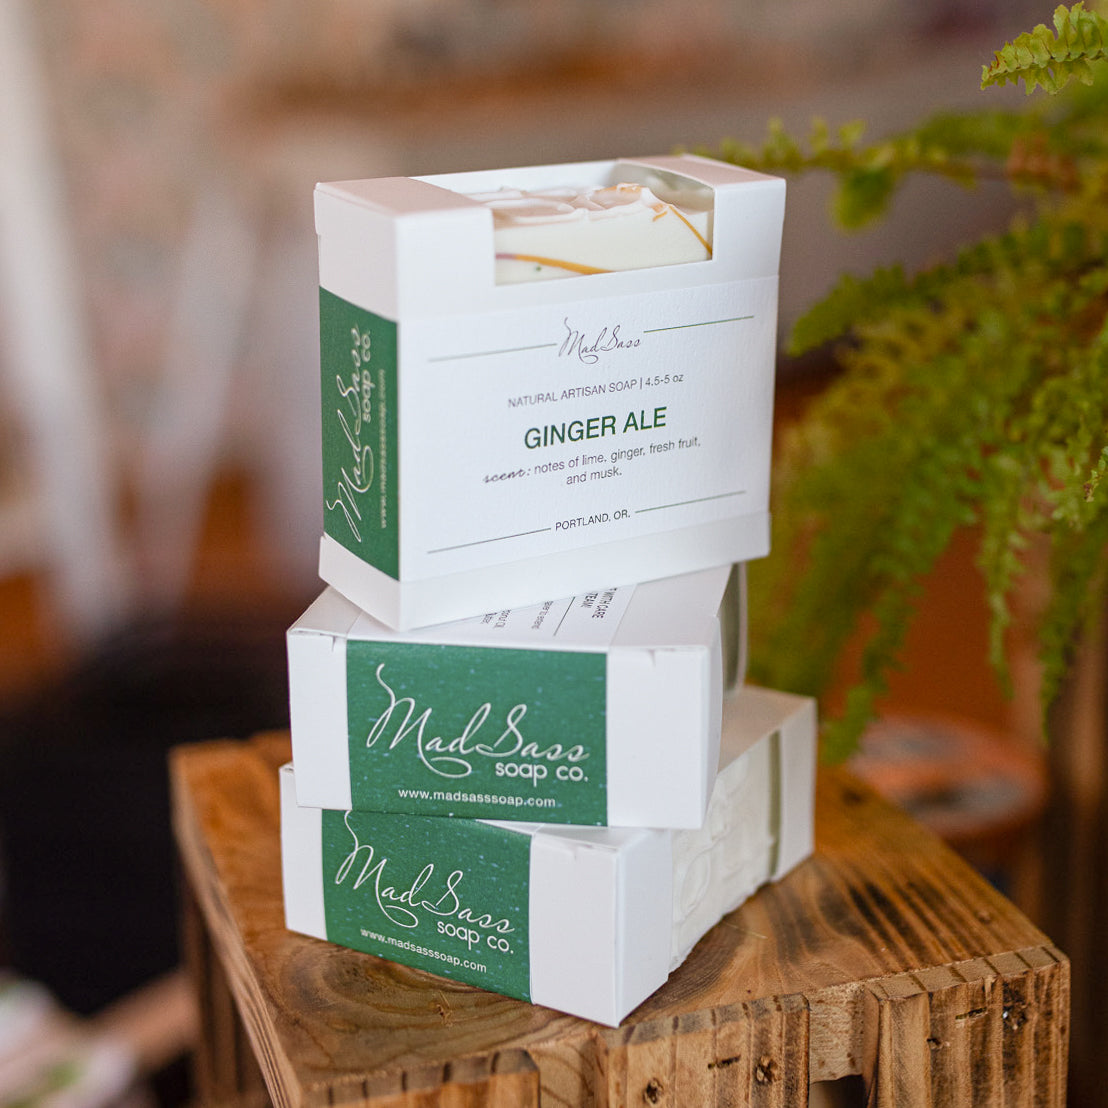 Three boxes of Ginger Ale soap stack on each other on a wooden block.